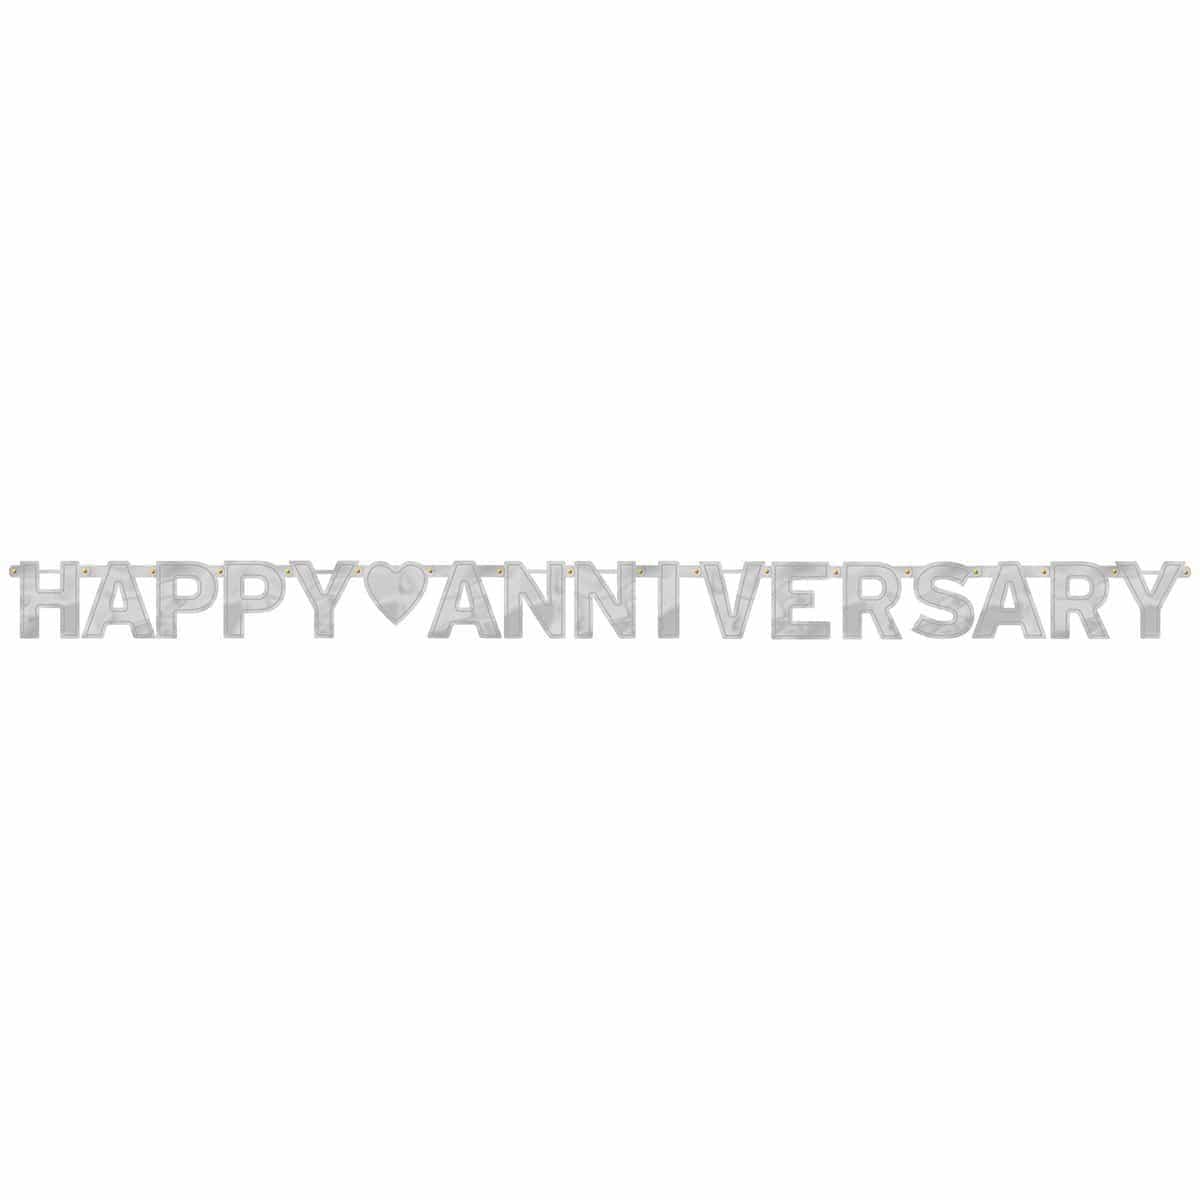 Buy Wedding Anniversary Happy Anniversary silver foil letter banner sold at Party Expert